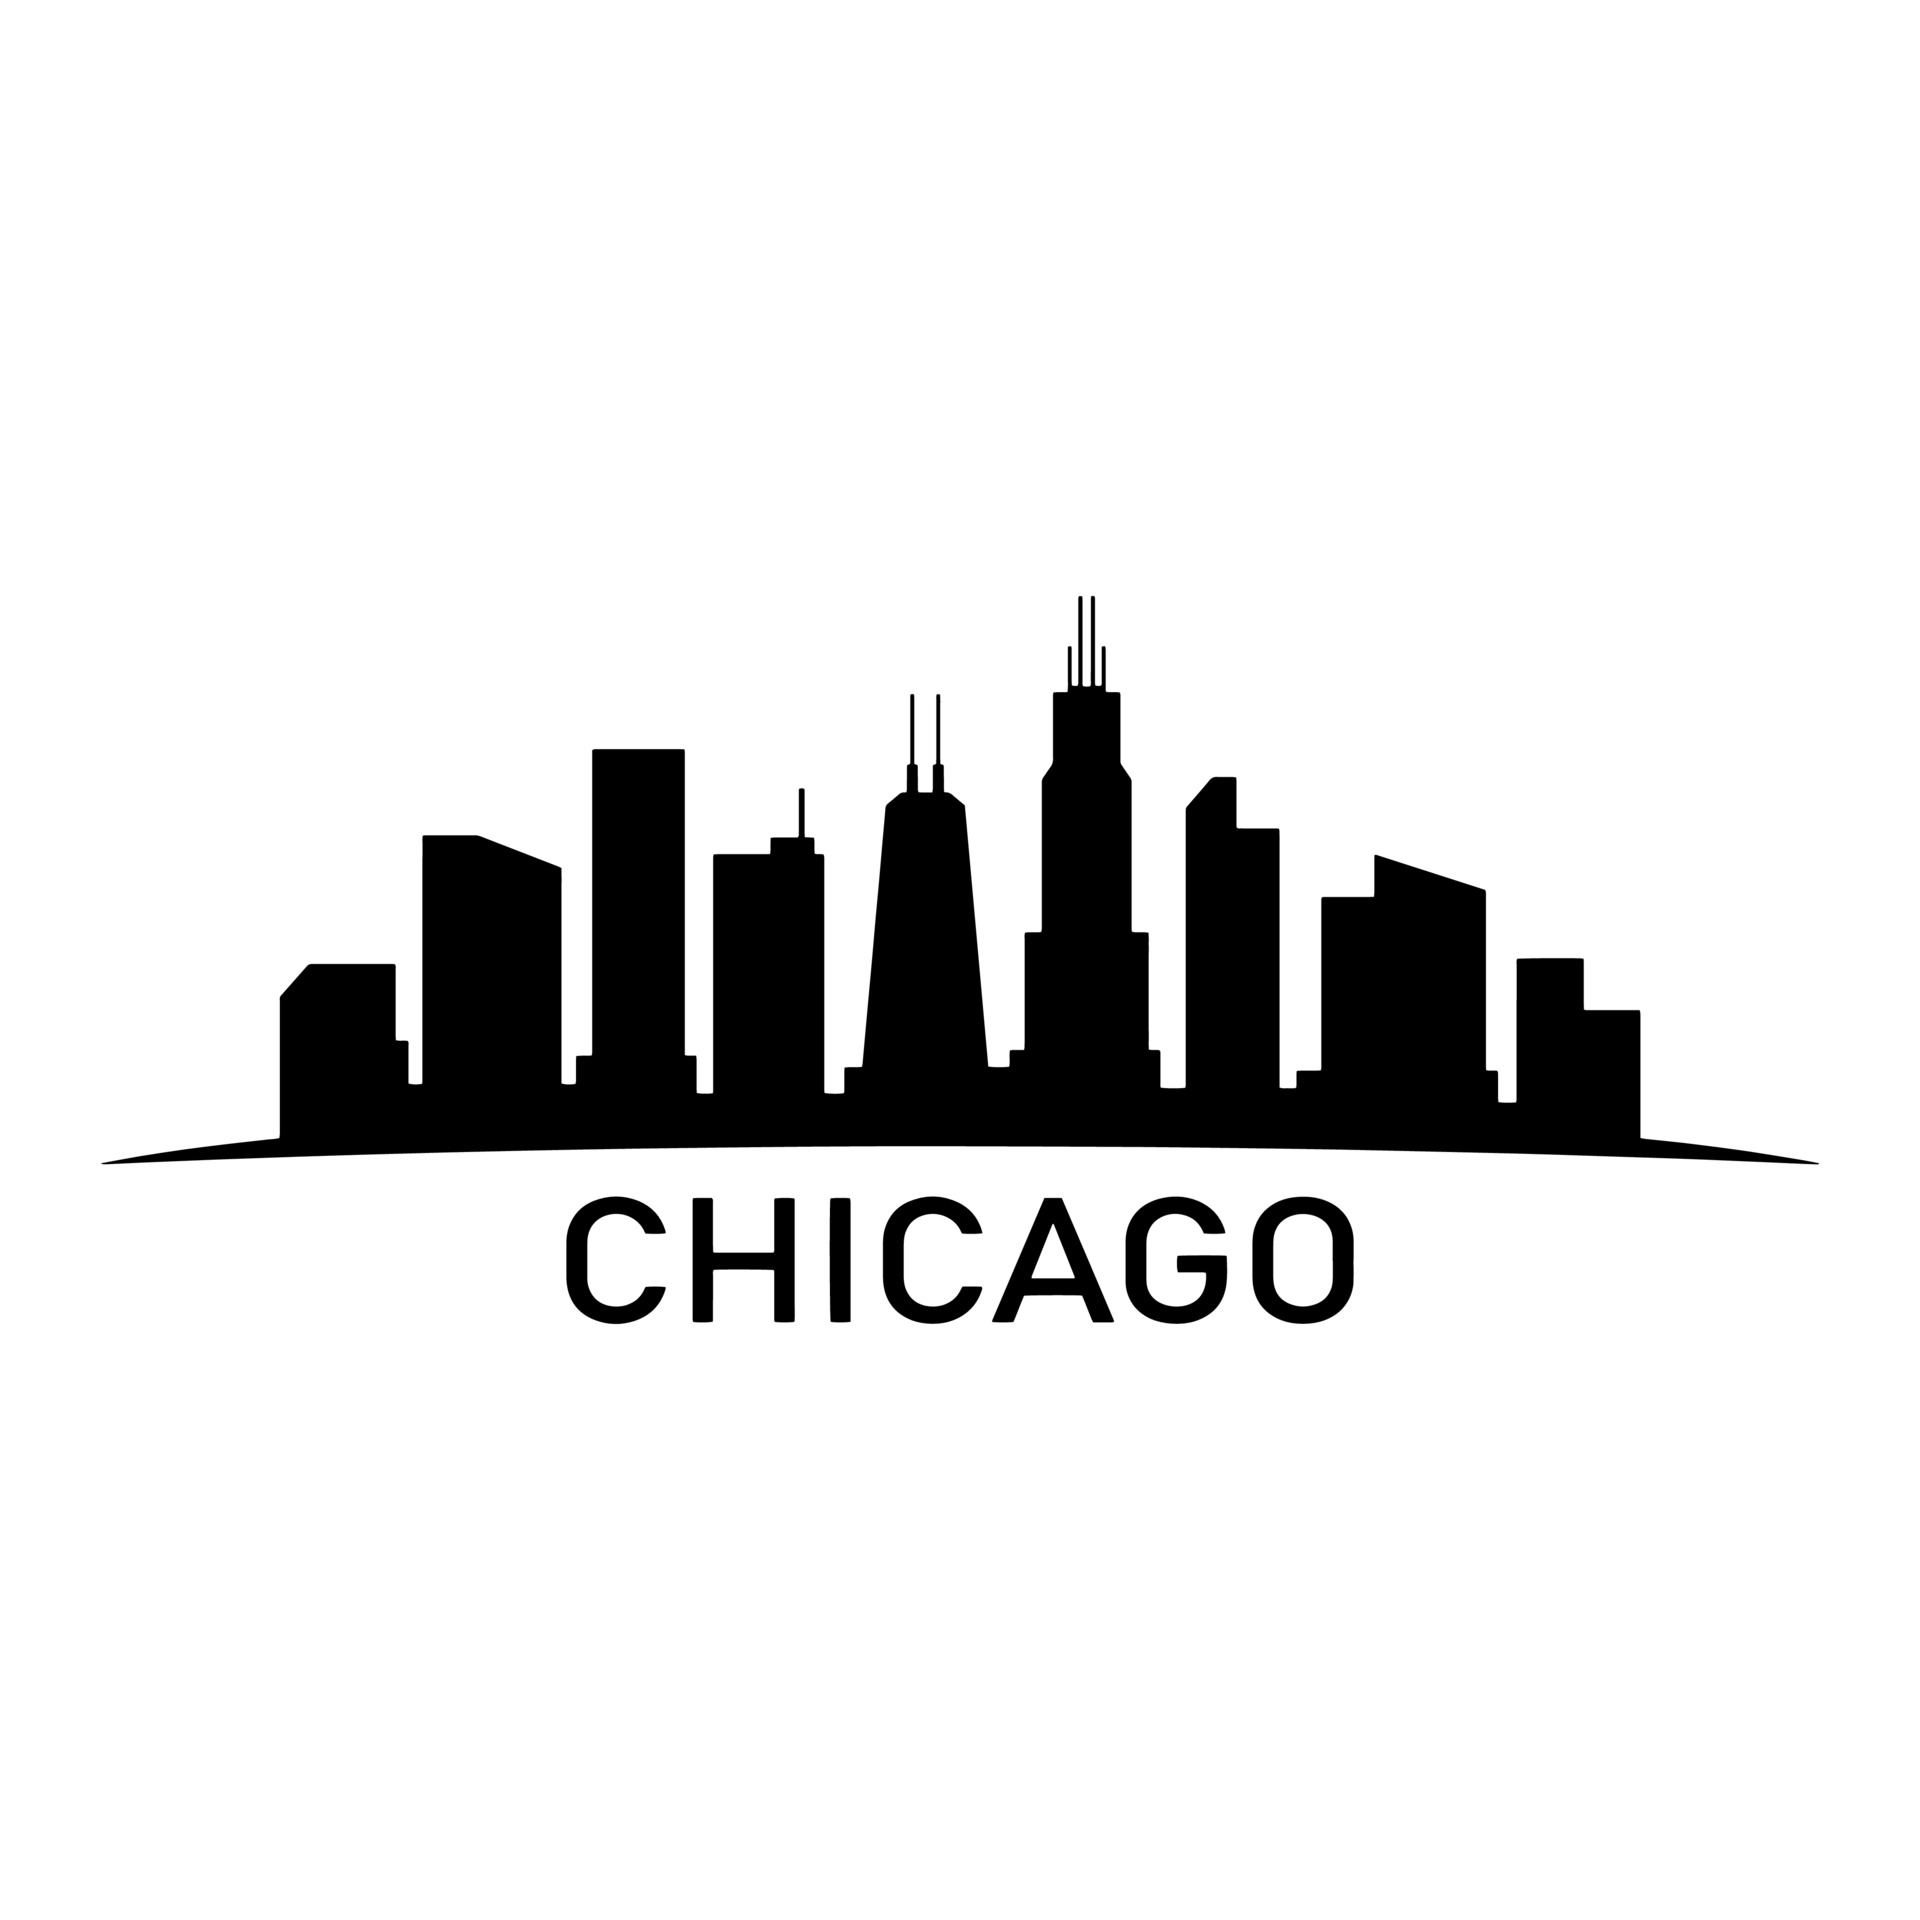 Chicago Skyline Vector Graphics Silhouette - Silhouette Png Download 337